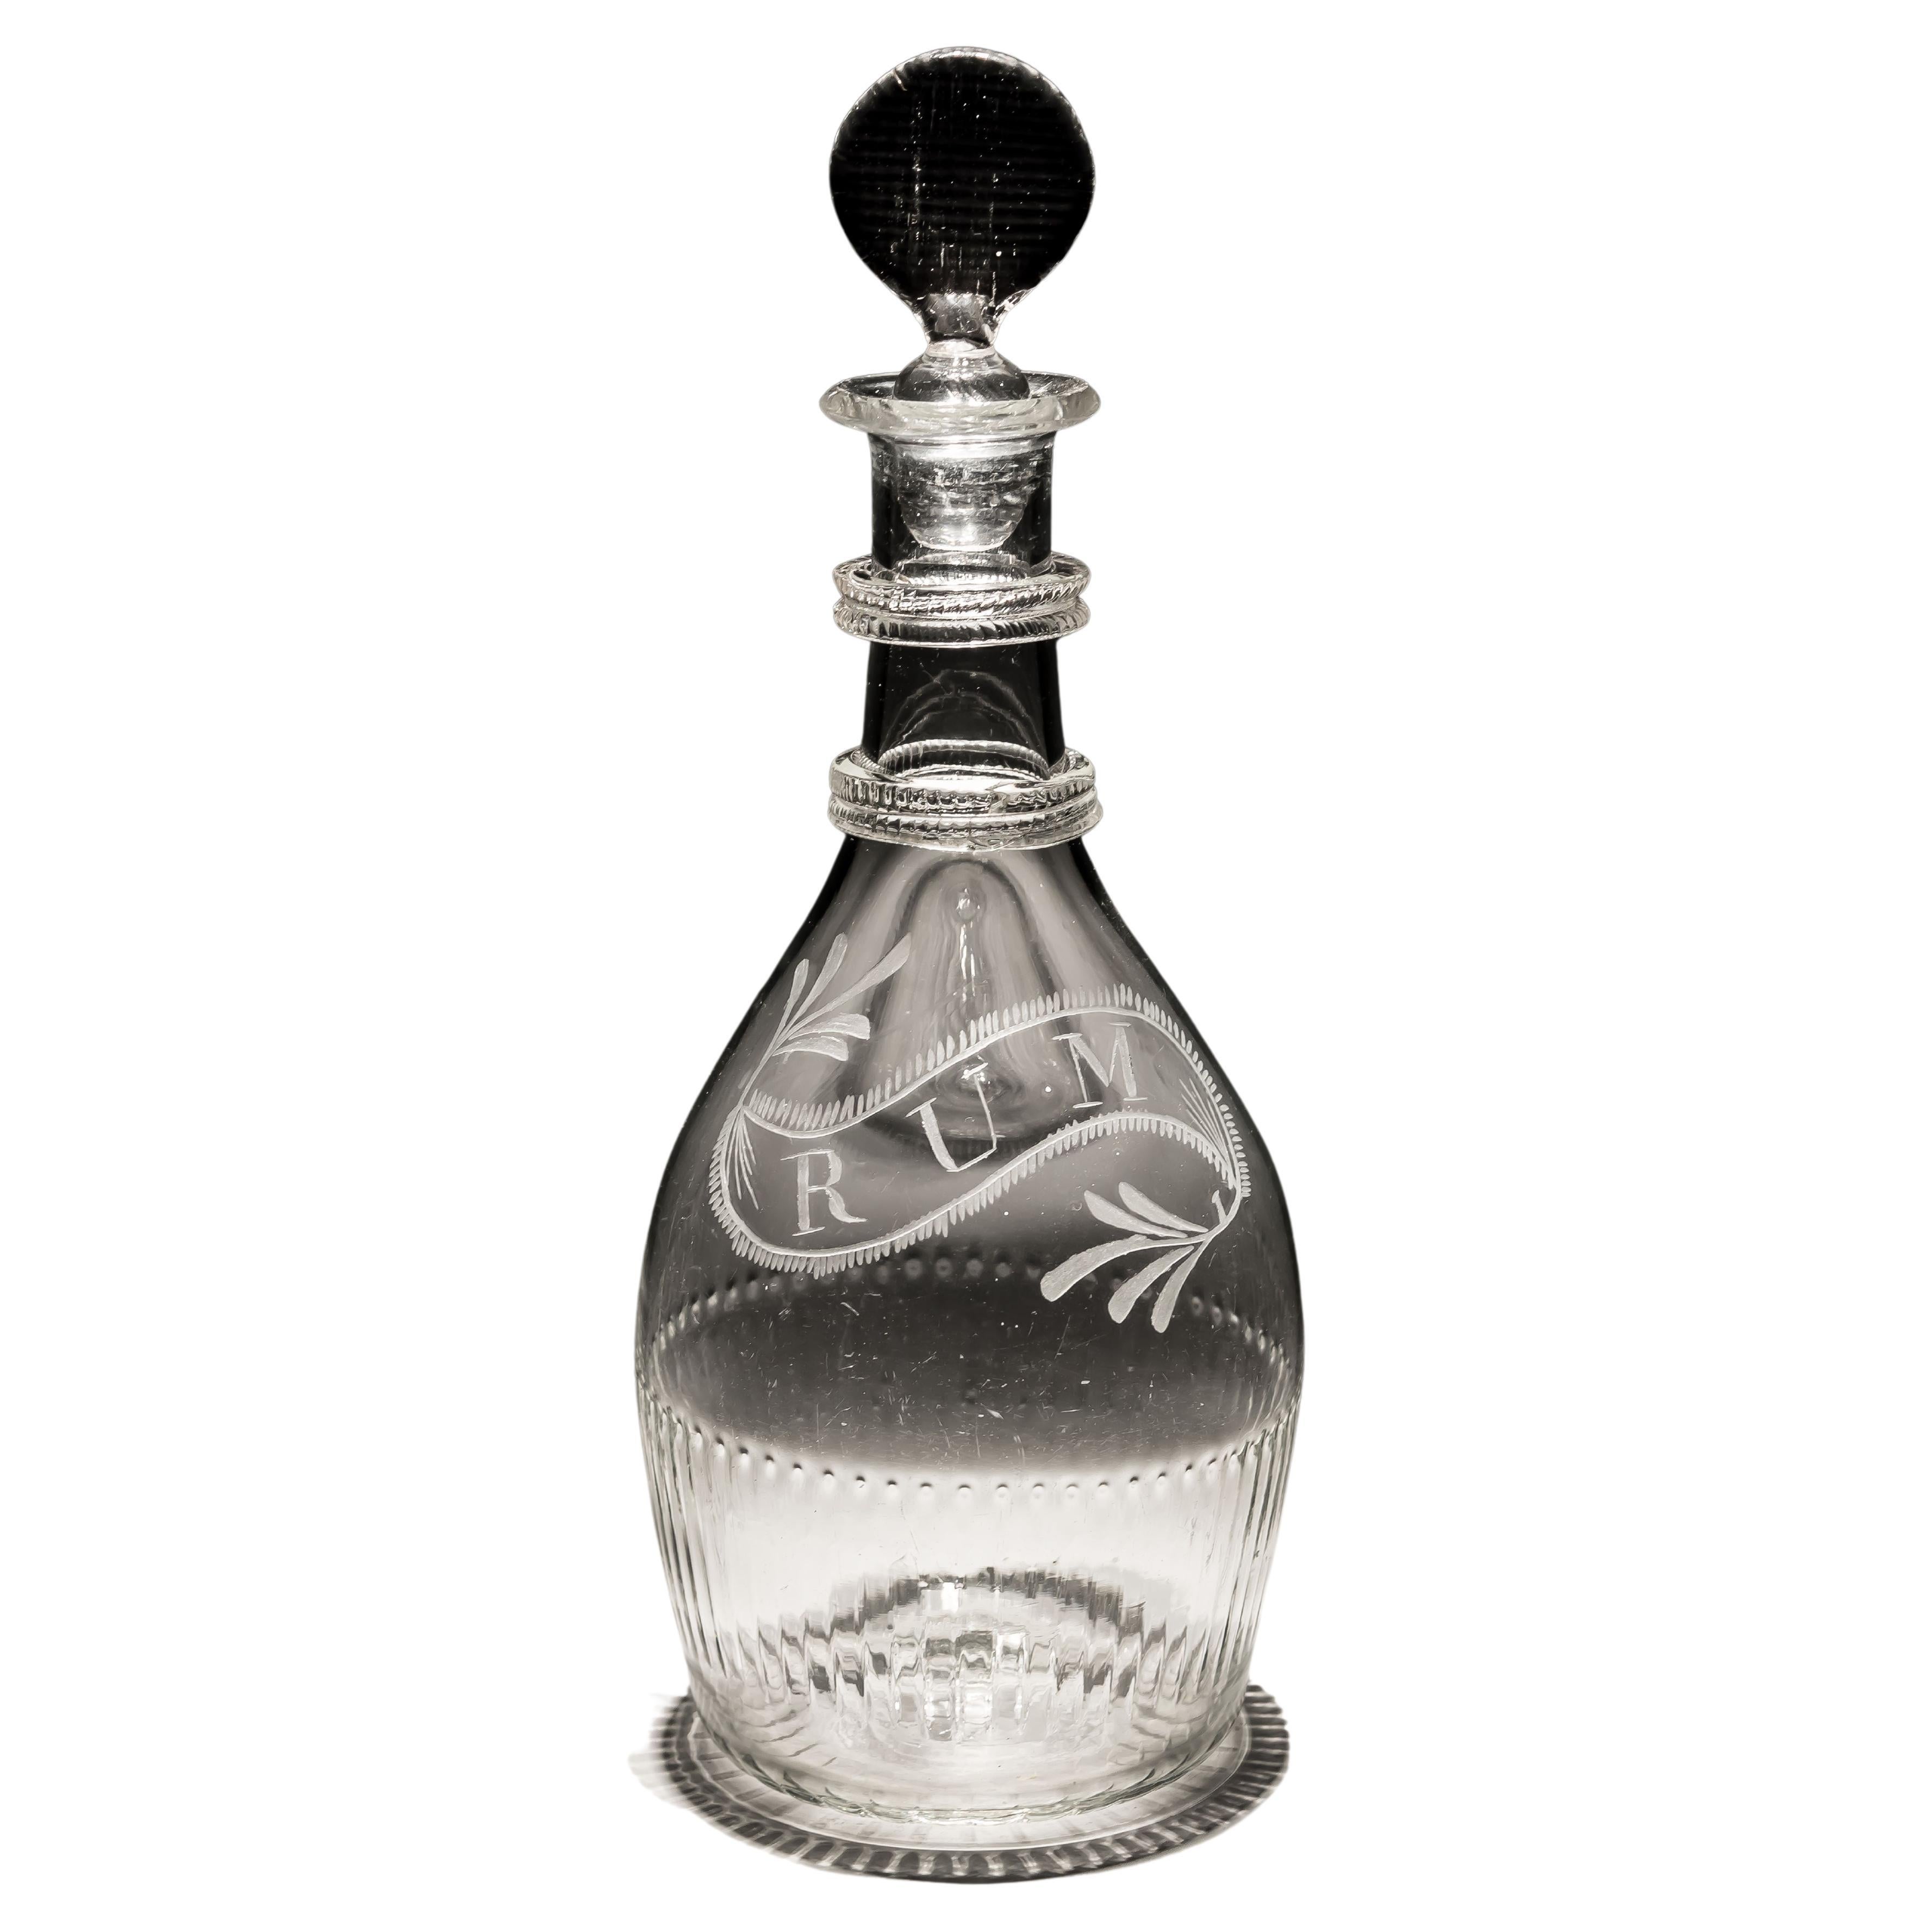 Engraved Irish Rum Decanter Attributed to Cork & Co